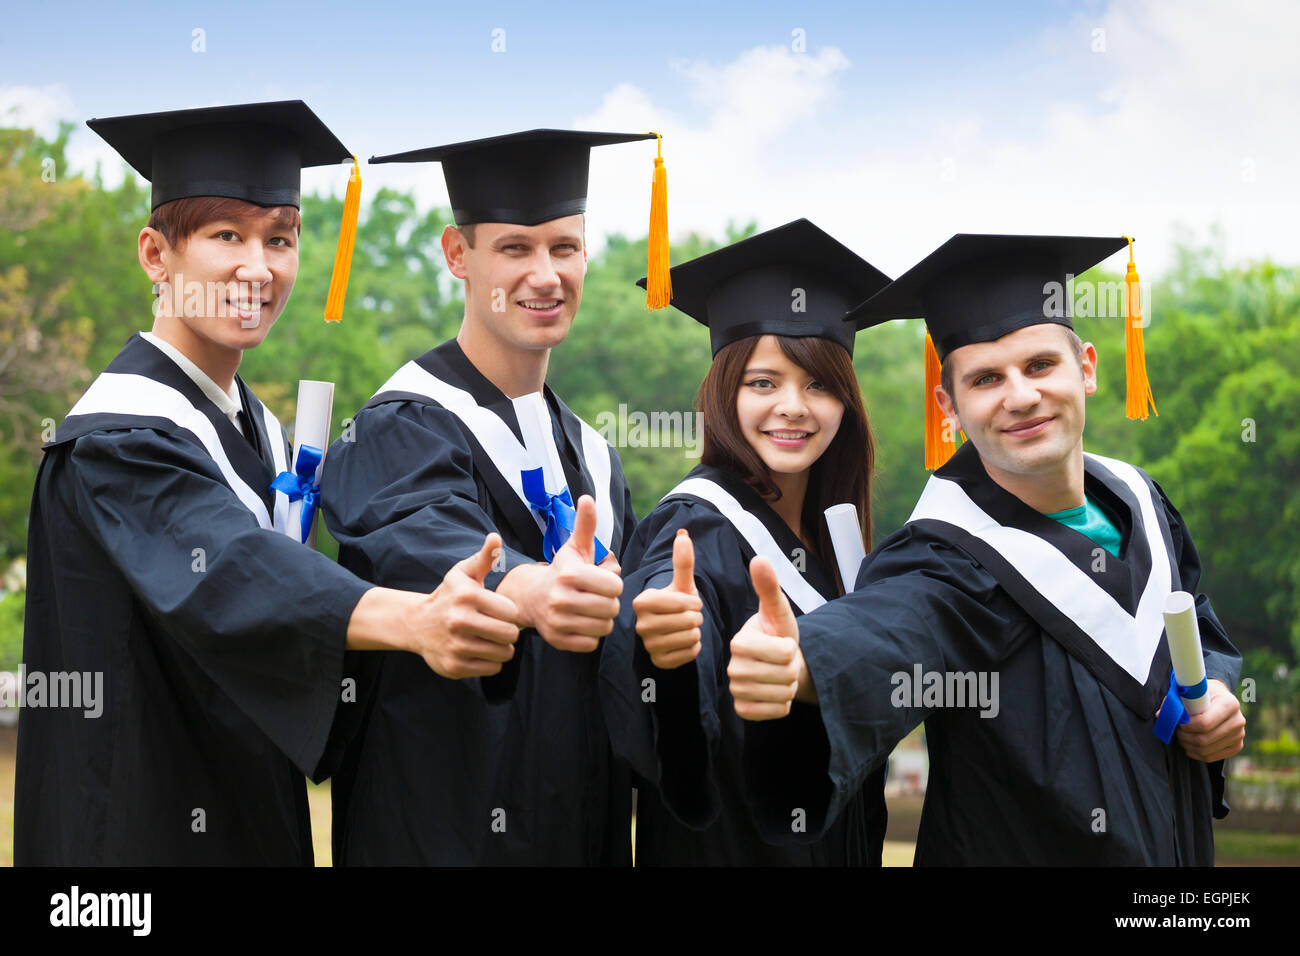 happy students in graduation gowns showing diplomas with thumbs up Stock Photo